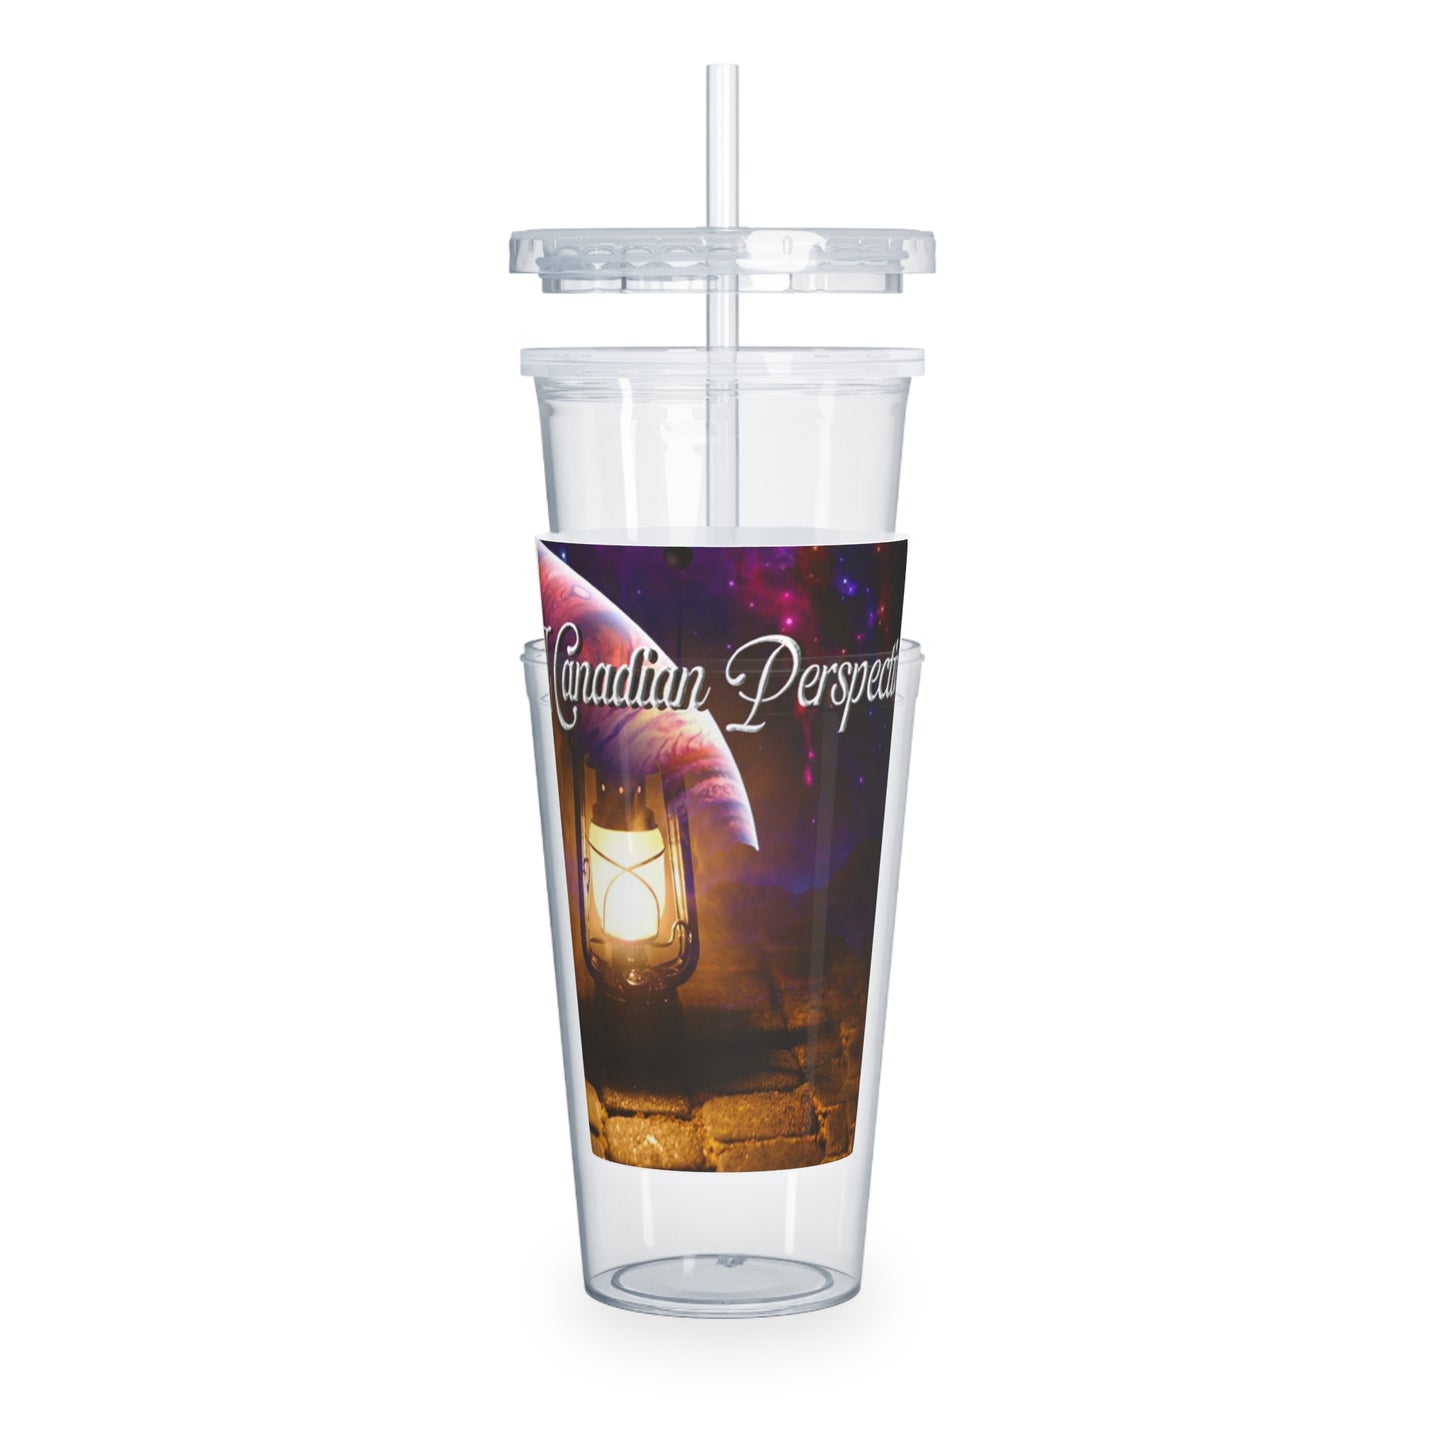 A Canadian Perspective - Plastic Tumbler with Straw